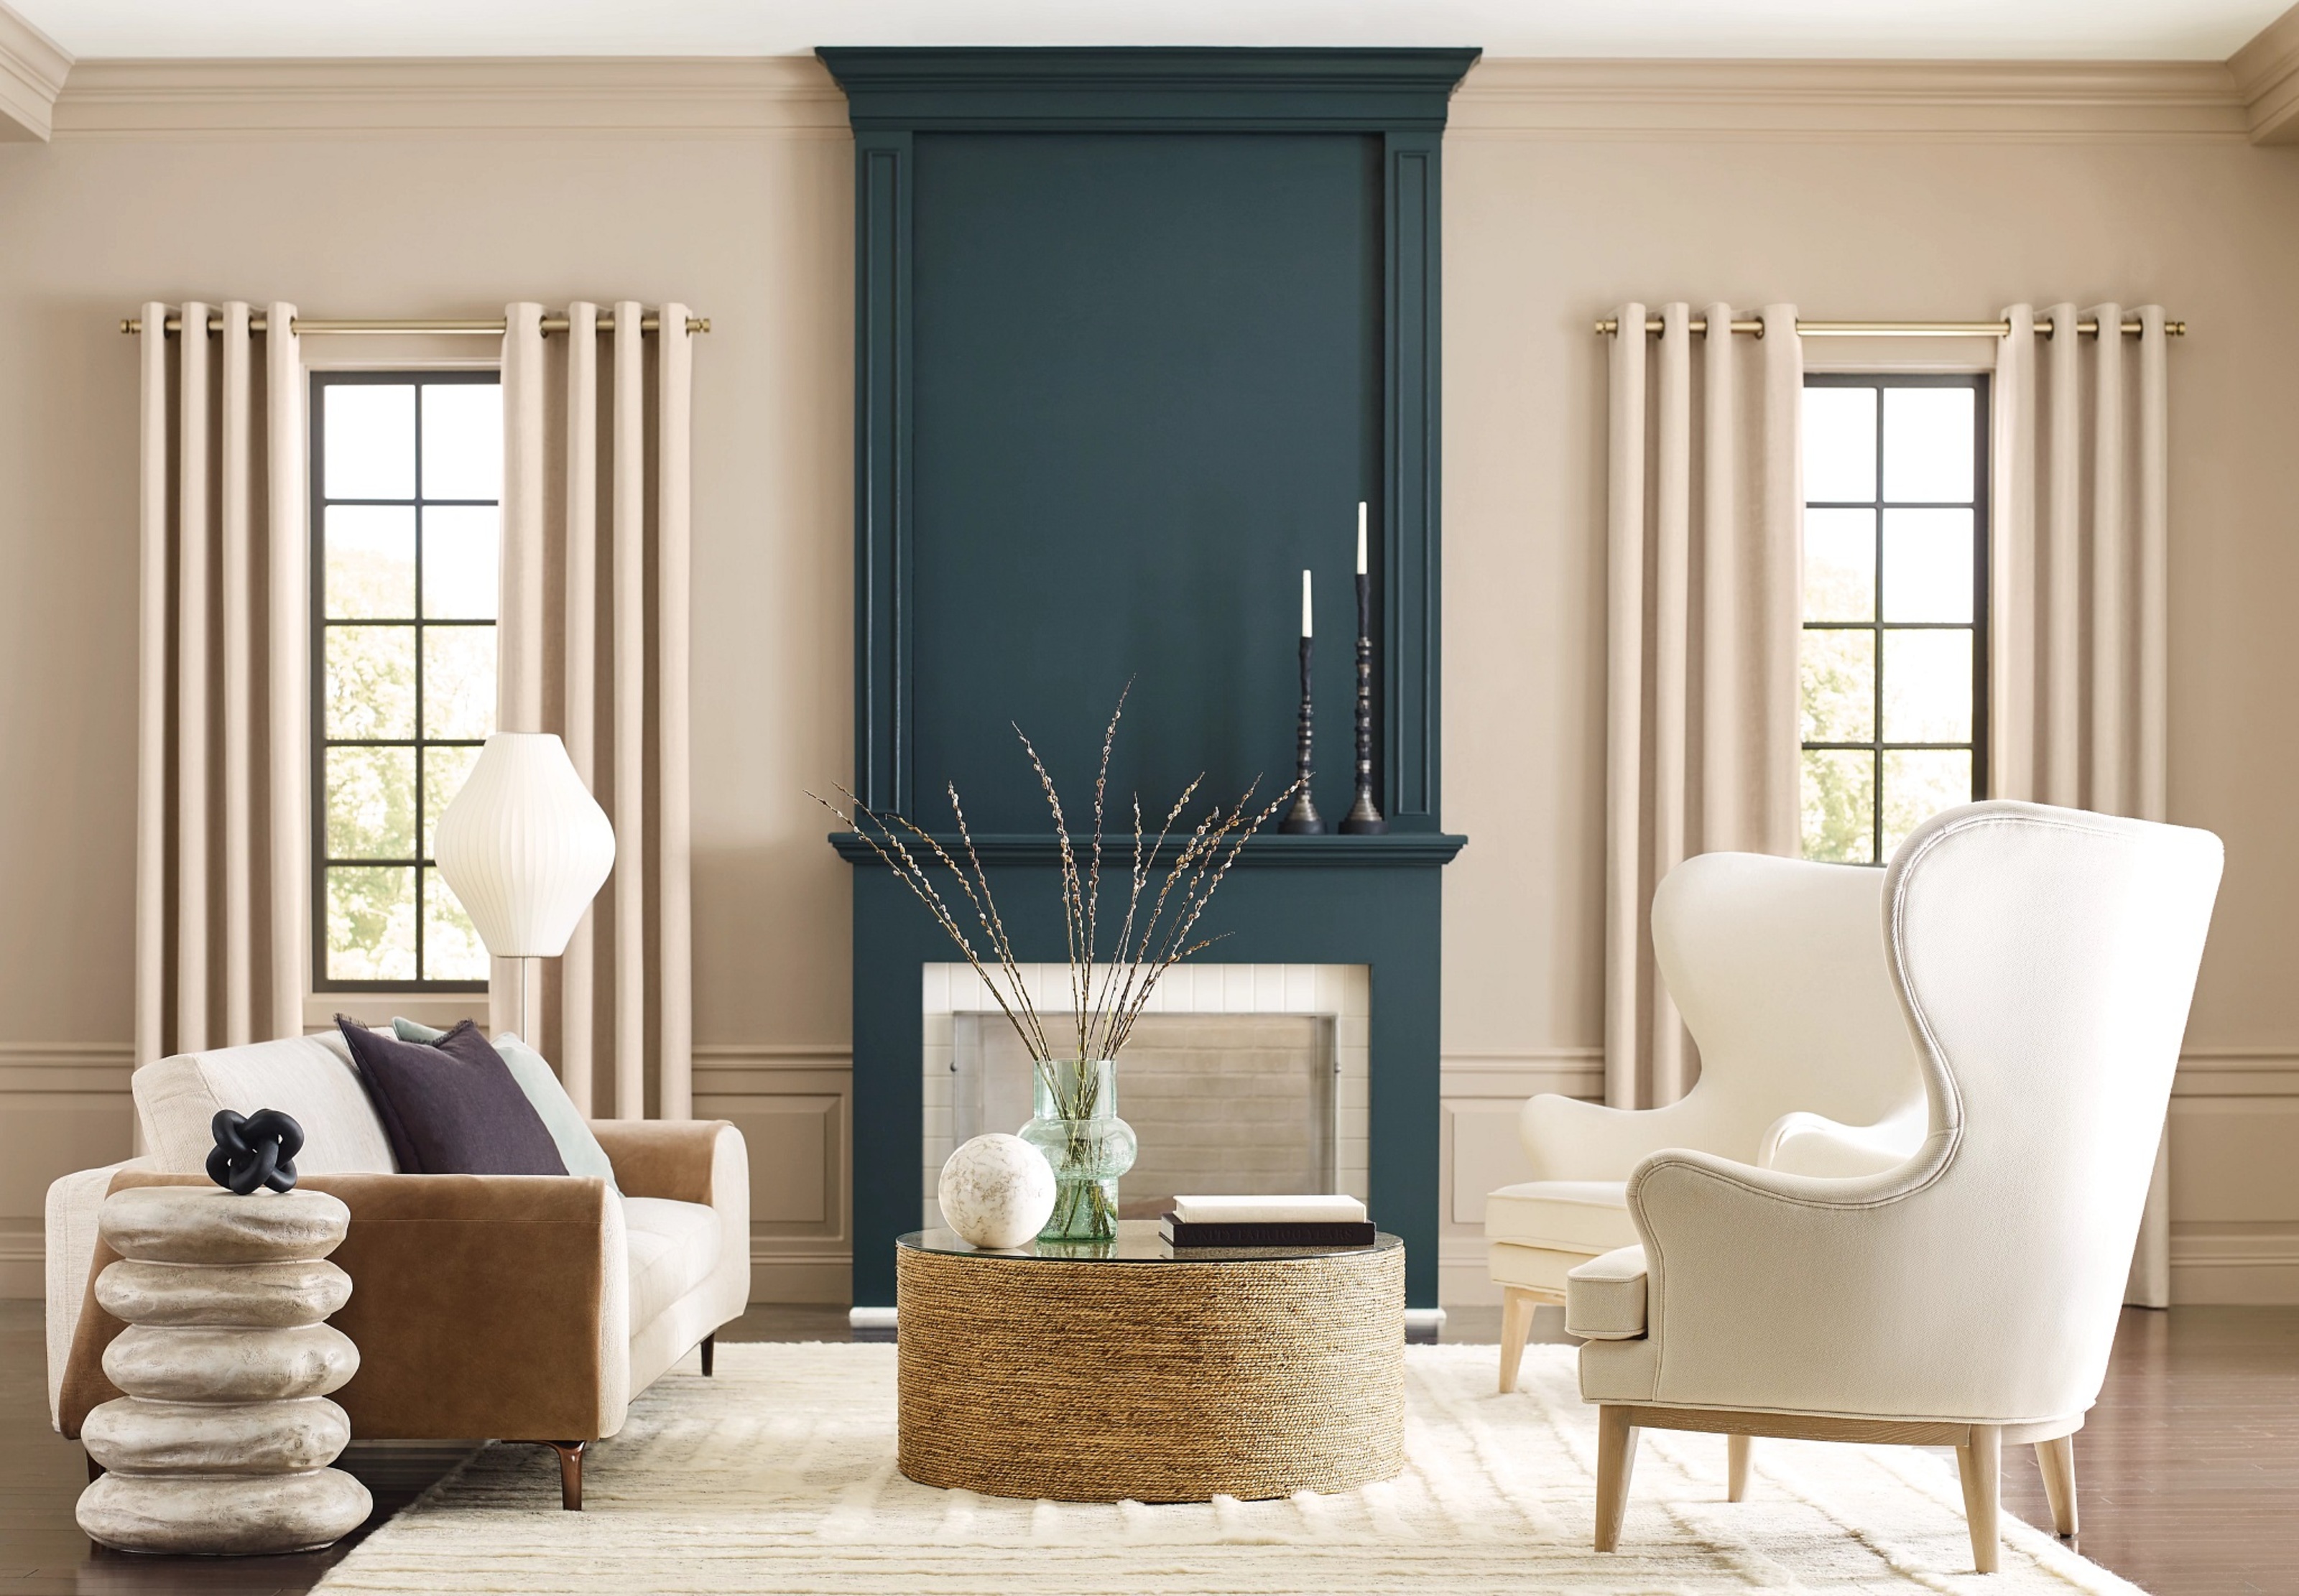 See the vast contrasts in this paint brand’s 2023 color predictions Livingetc